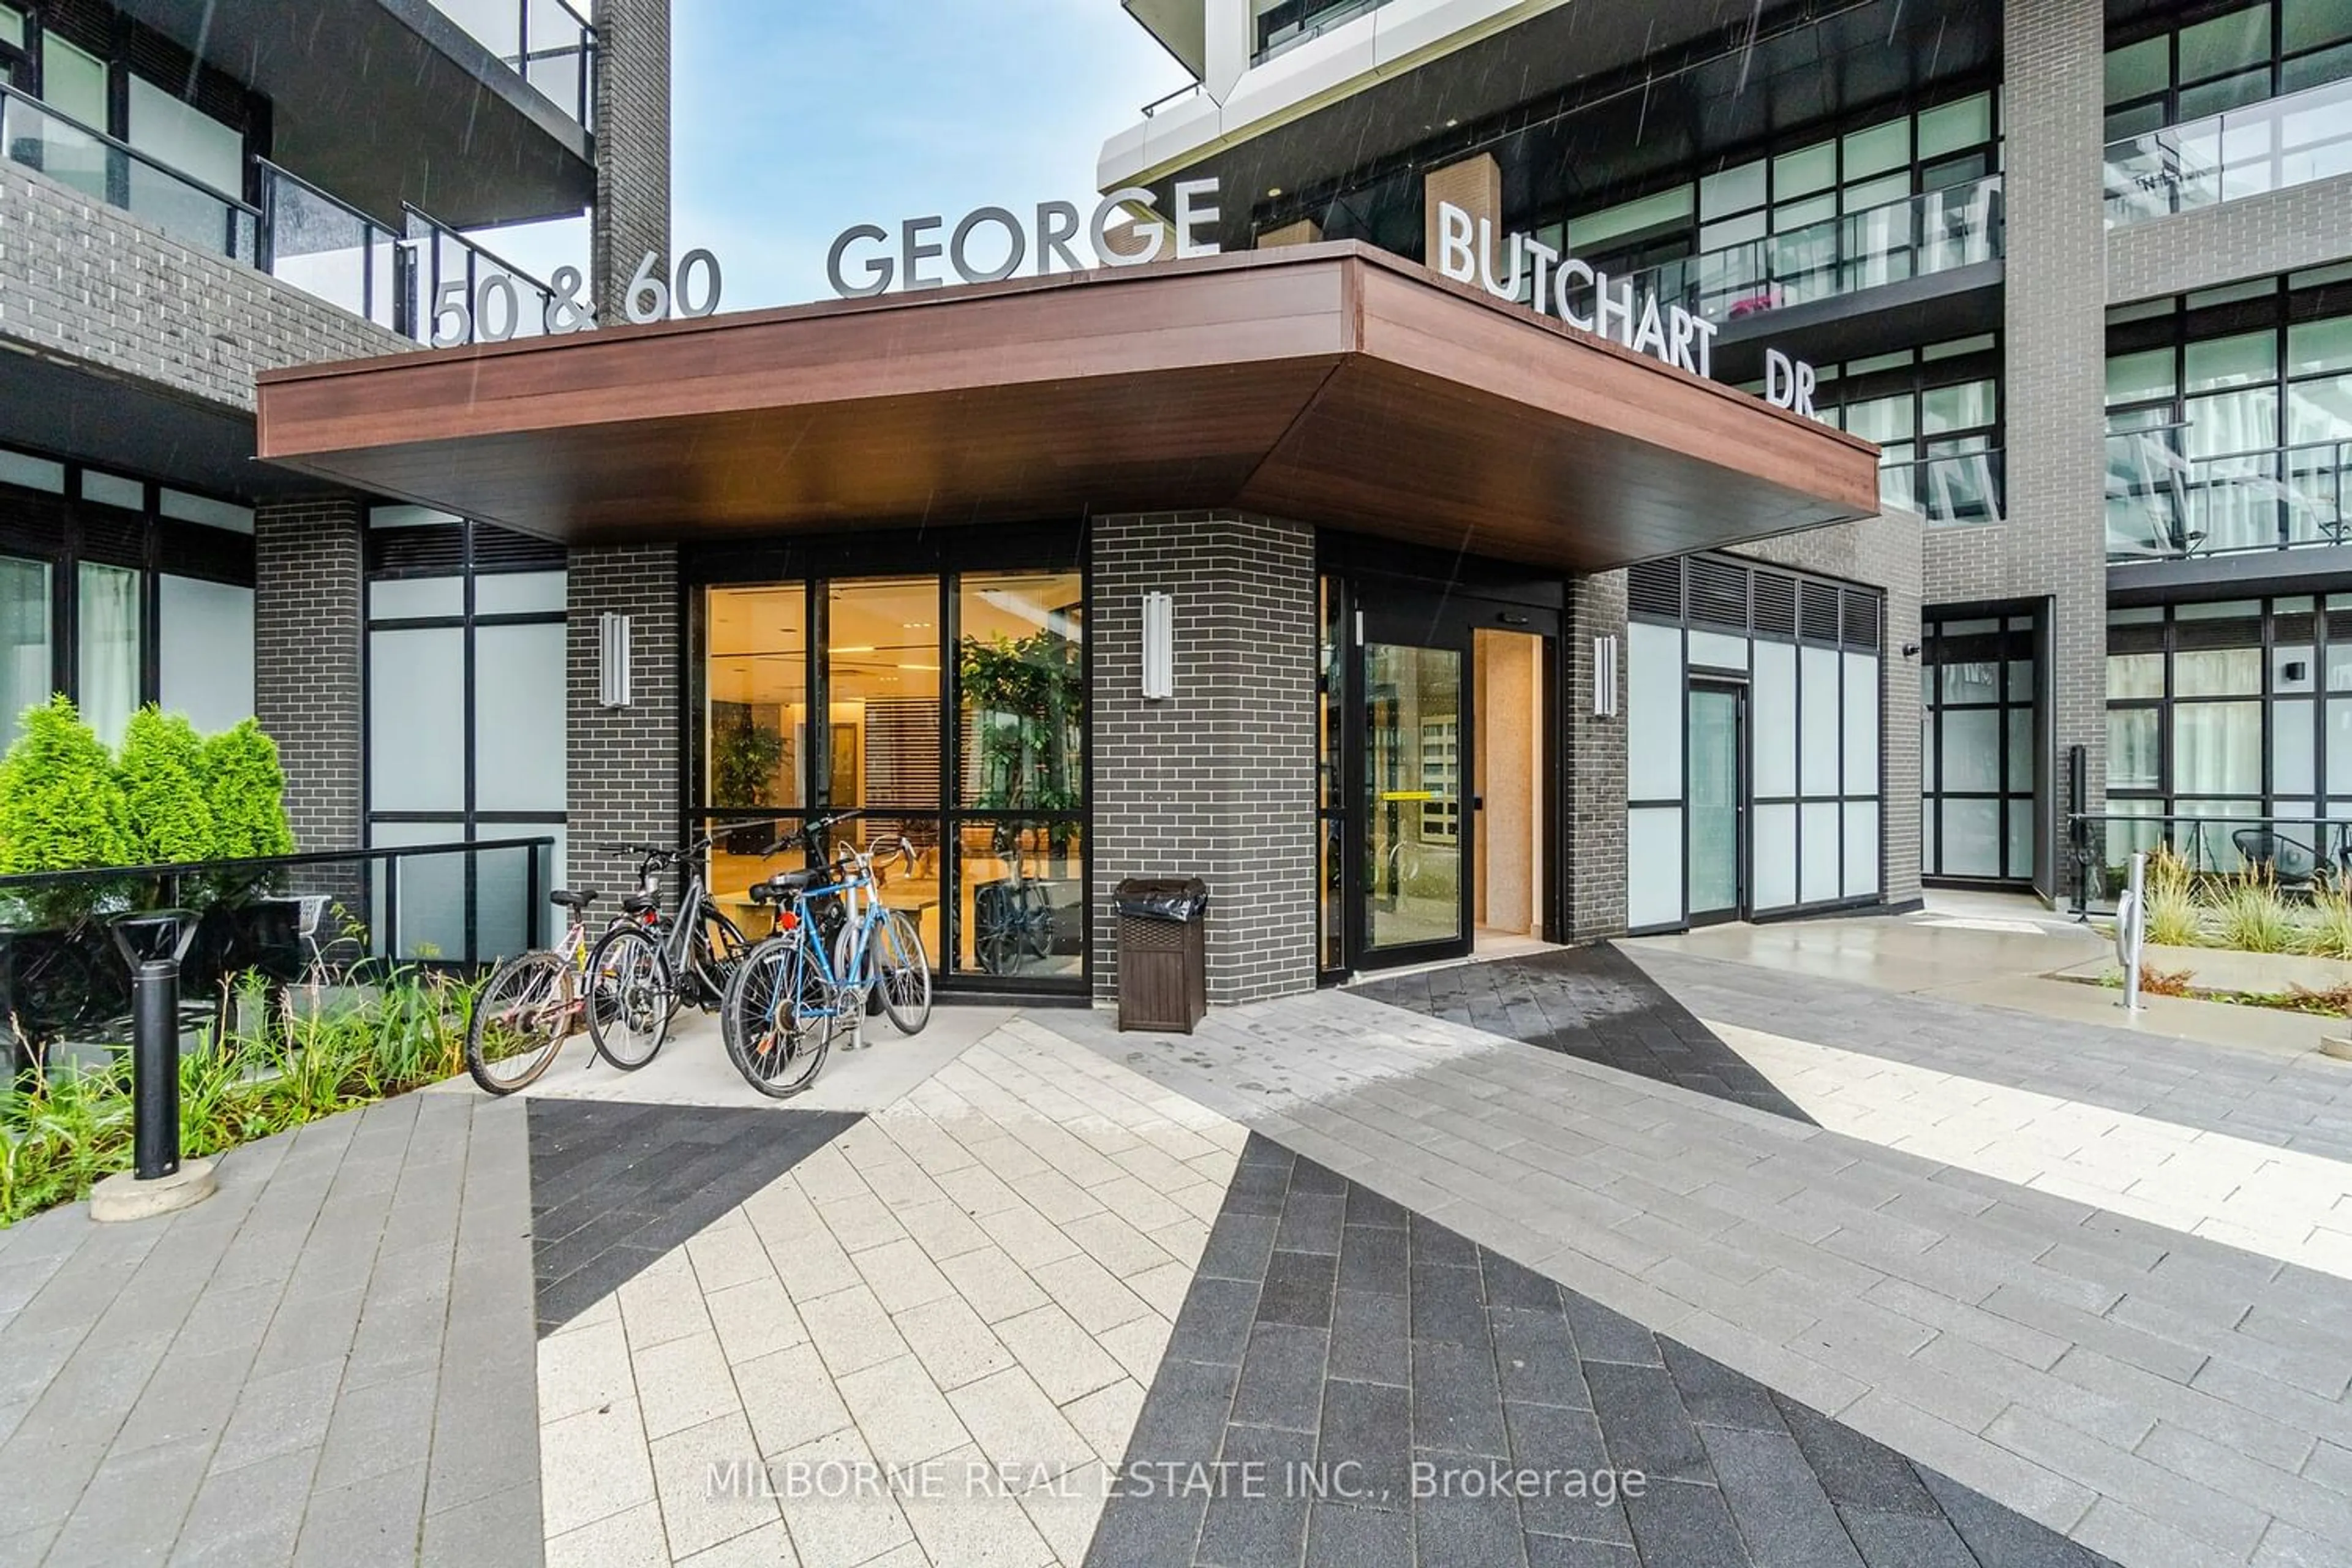 Other indoor space for 60 George Butchart Dr #119, Toronto Ontario M3K 2C5